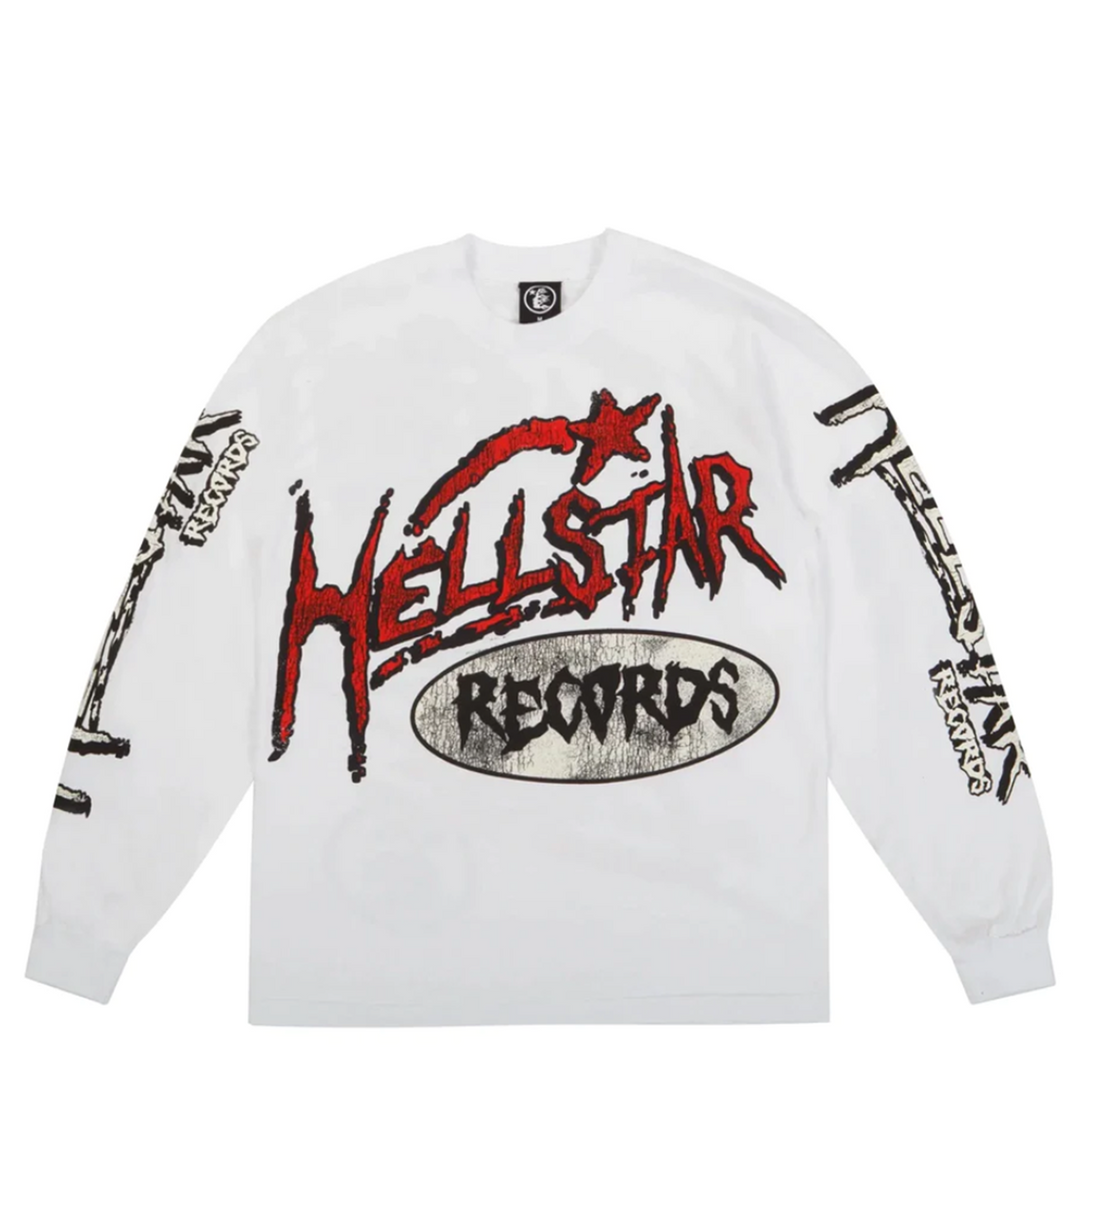 Hellstar Studios Capsule 9.0 Records Long Sleeve White Tee, Front View